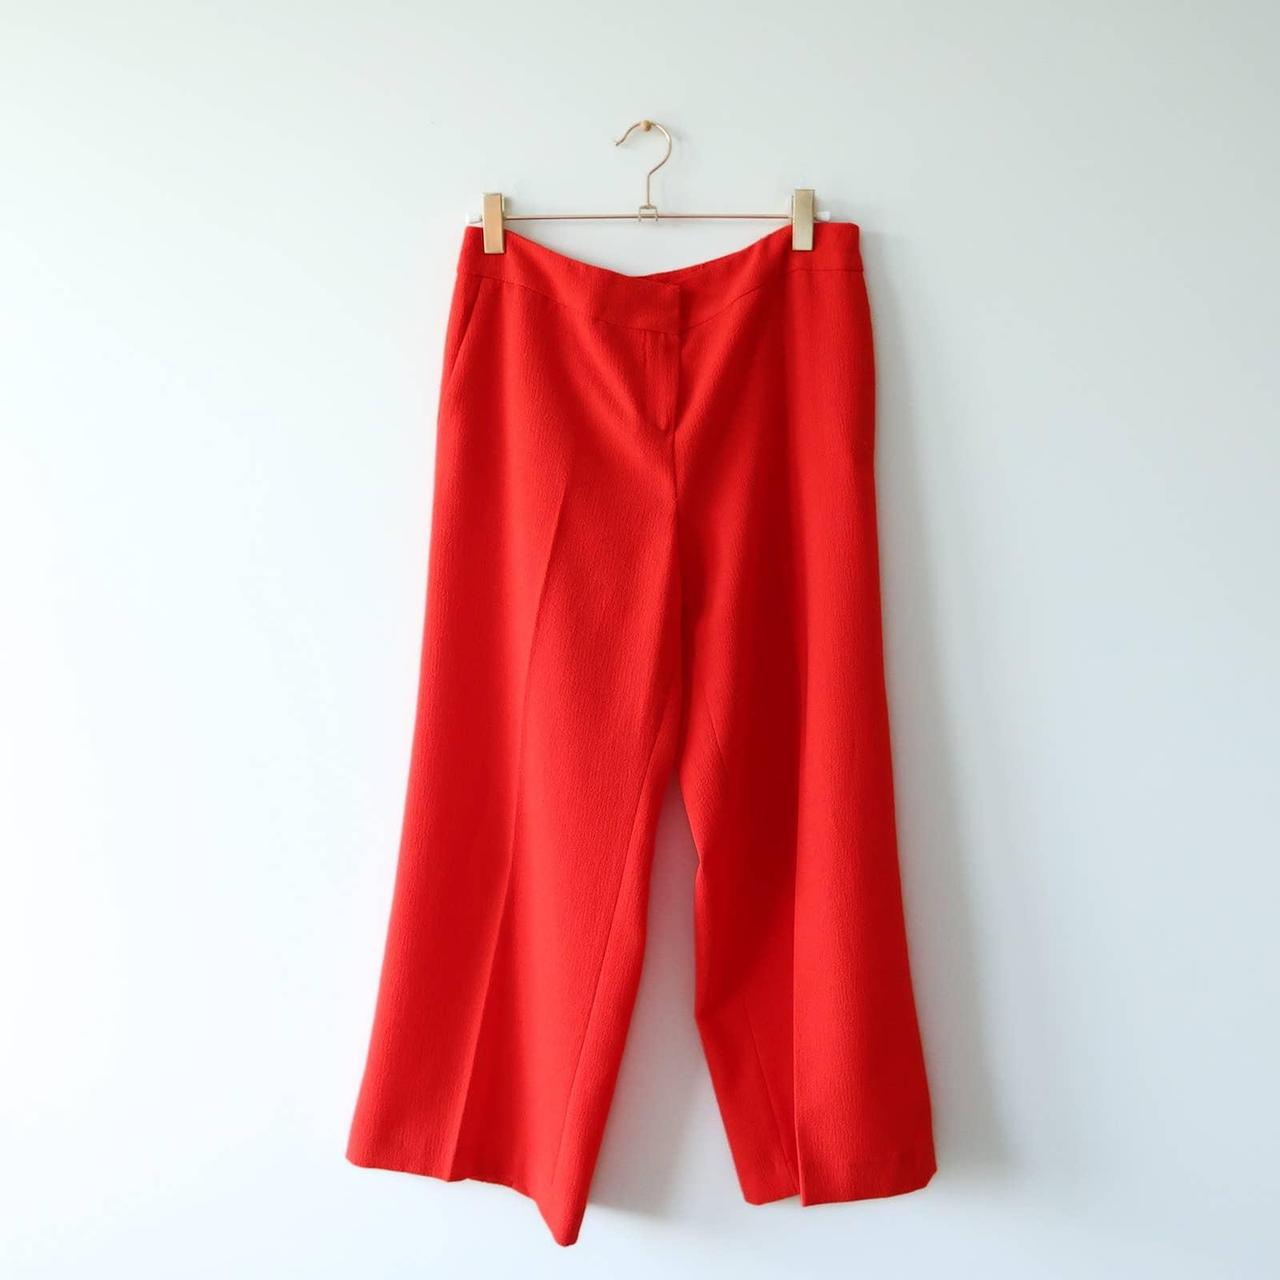 Buy 80s Bright Red Formal Pants Vintage Rayon High Rise Trousers Online in  India - Etsy